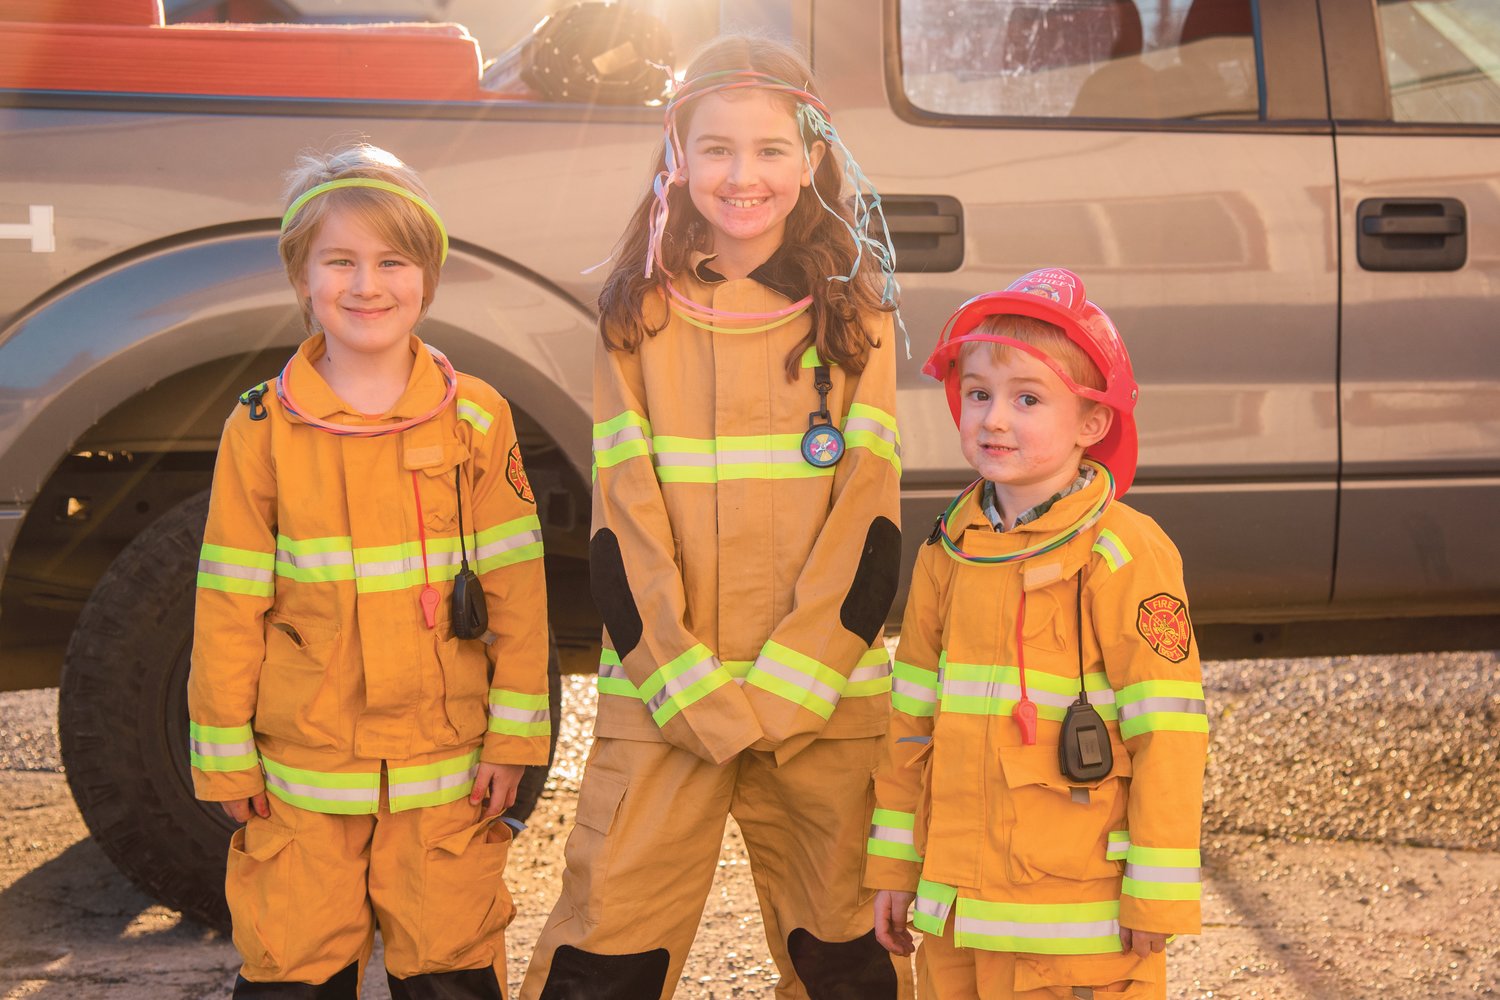 From left, Quinton, 6, Savannah, 8, and Grayson, 3, pose for a photo while dressed in firefighter coats outside the Lewis County Fire District #4 Haunted House in Morton on Halloween.